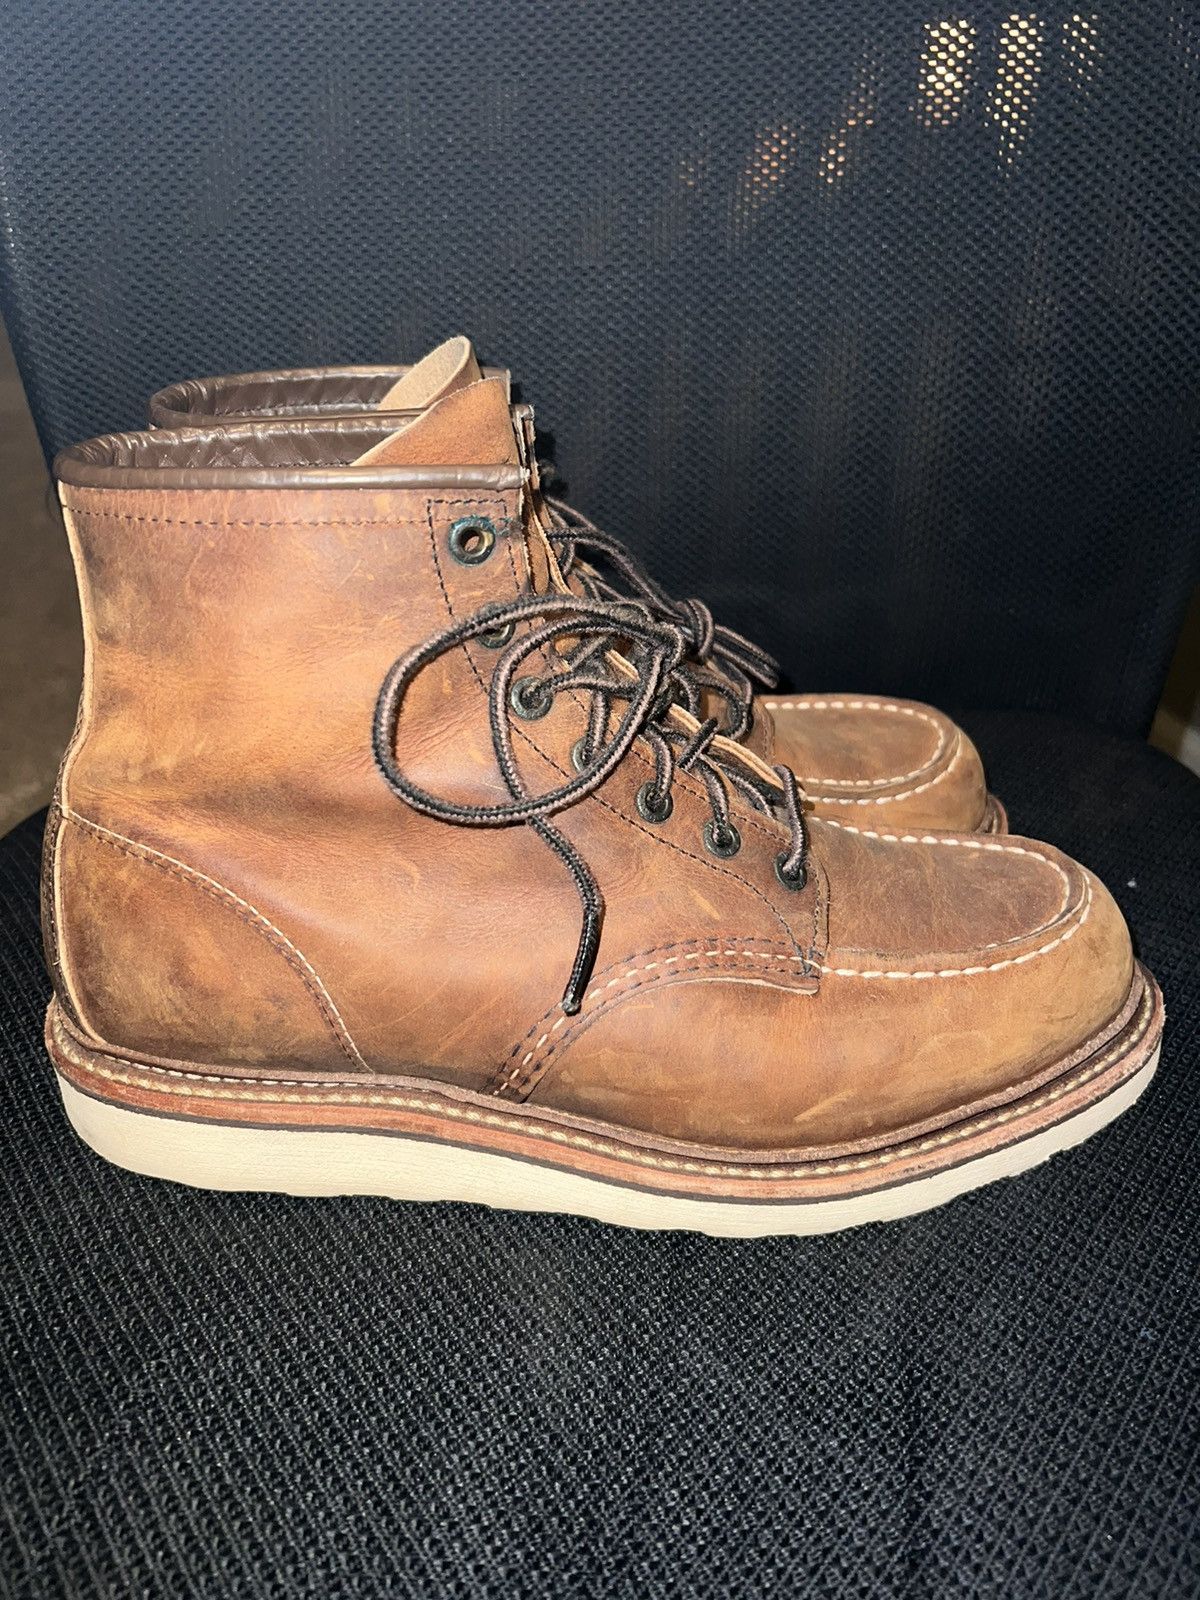 Red Wing Red Wing 1907 size 9 Size US 9 / EU 42 - 1 Preview